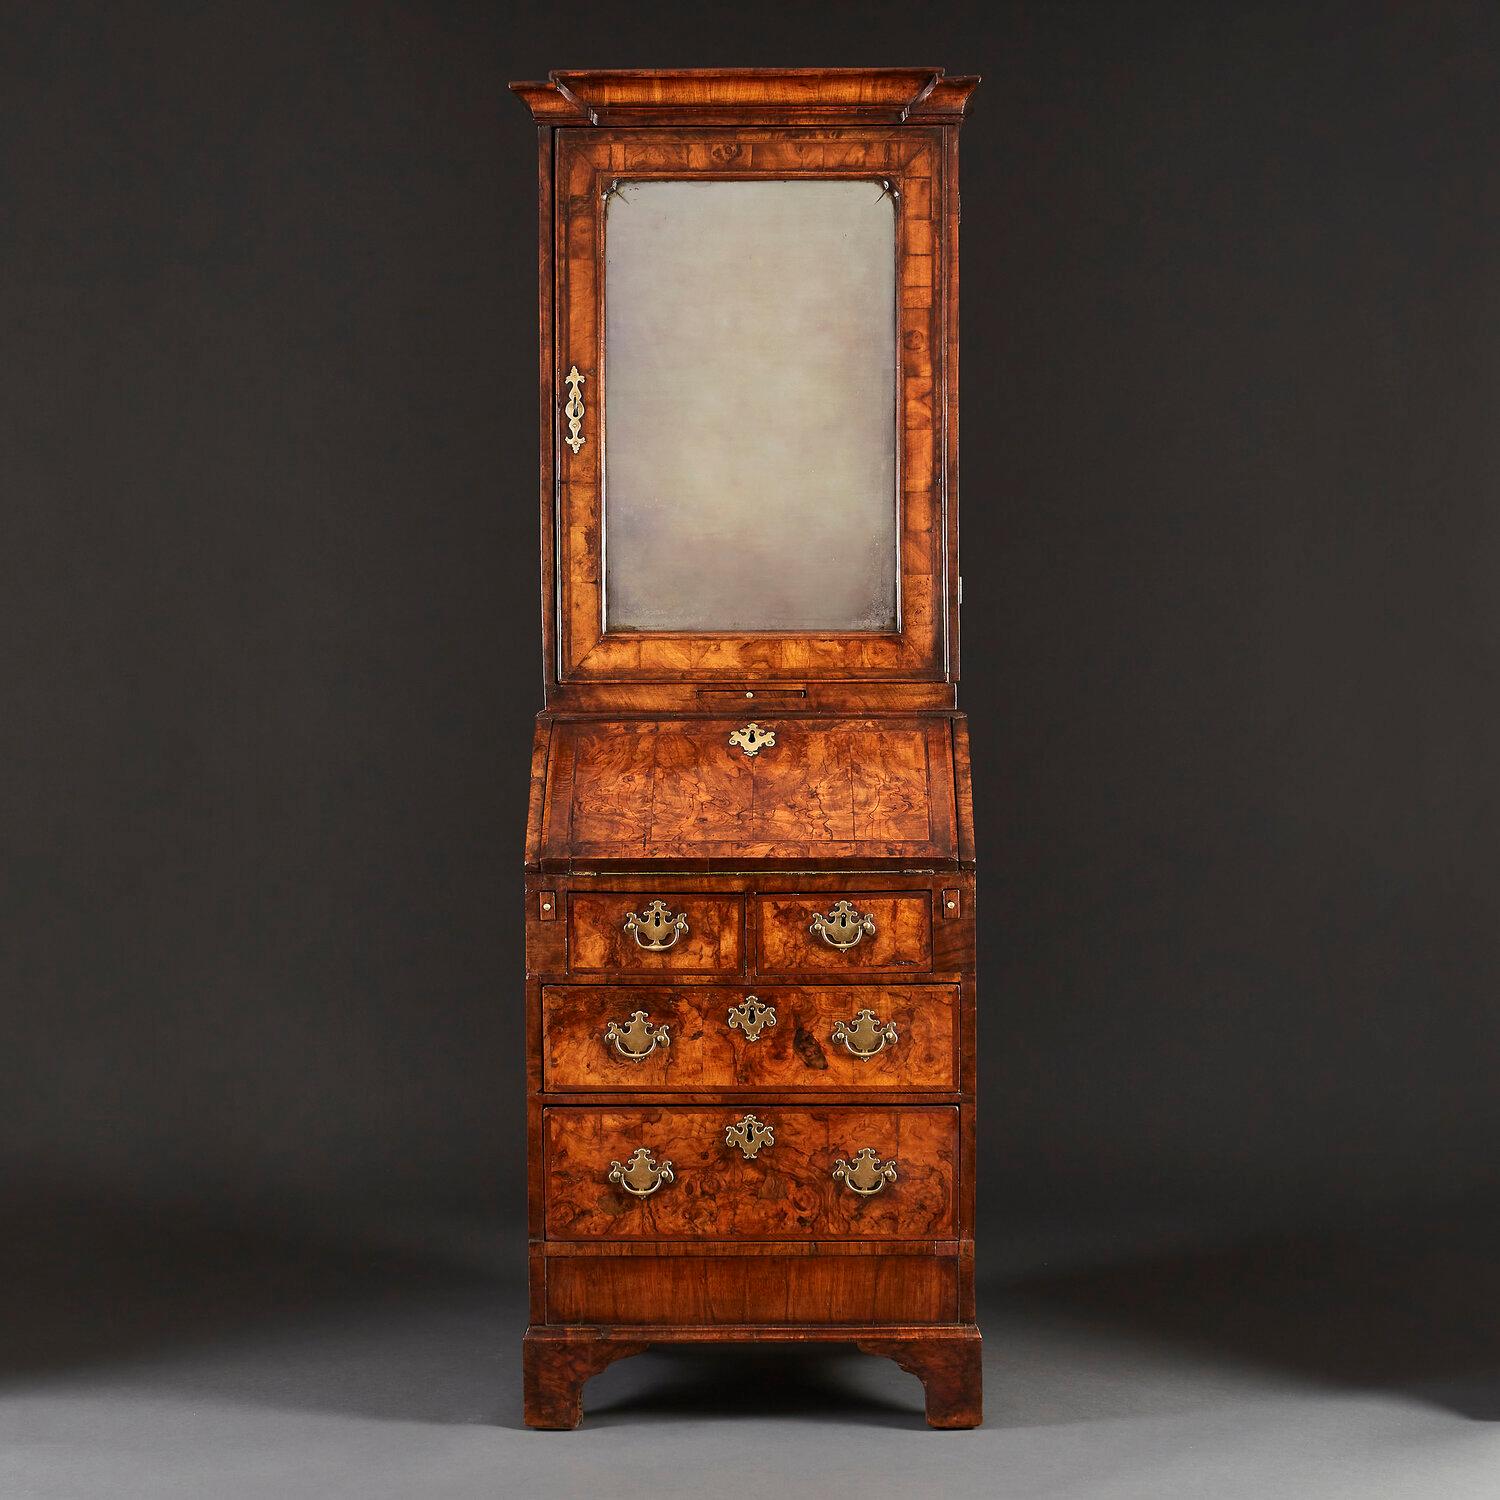 A fine Queen Anne period burr walnut bureau bookcase of narrow proportions, the upper body with a beveled mercury mirror to the door, opening to reveal five drawers to the interior, with fine burr walnut veneer. The lower body opening with drop leaf